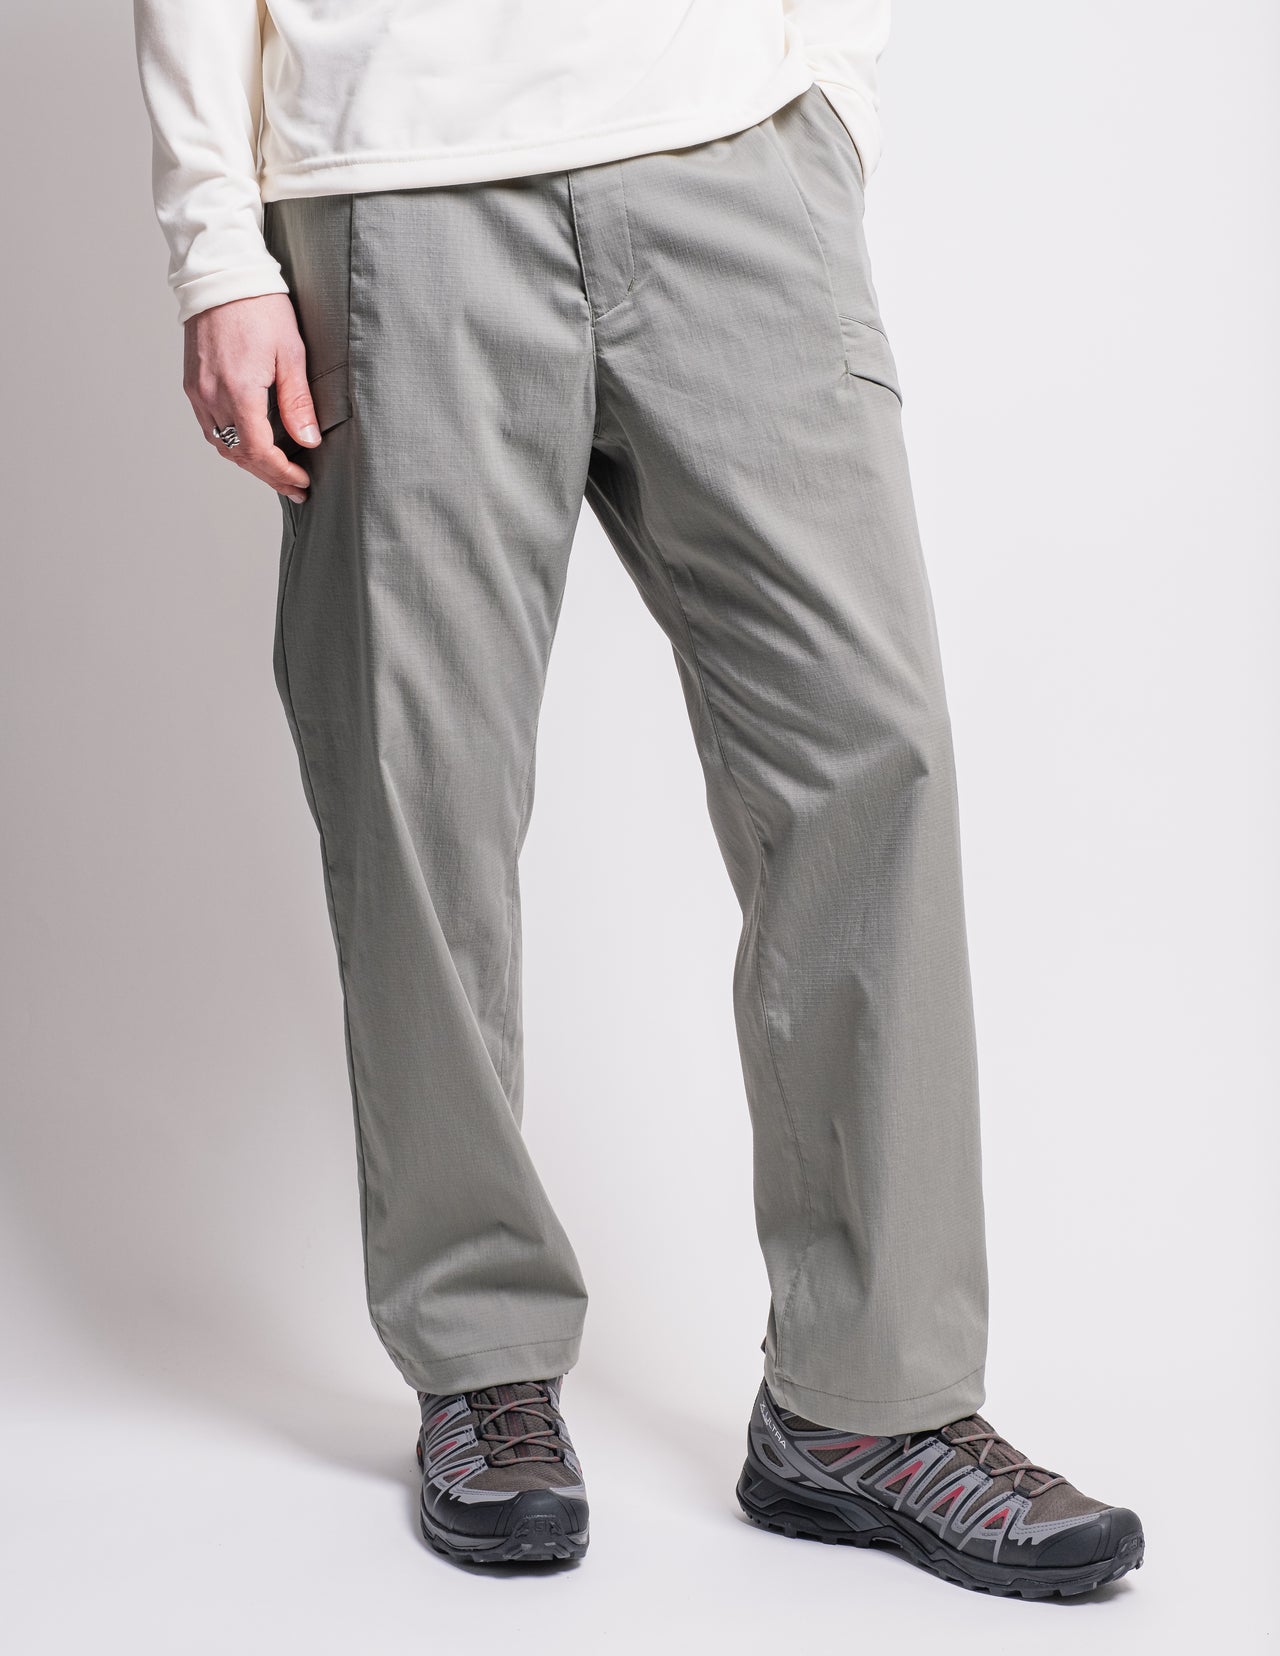 Fire-Resistant Stretch Pants in Foliage